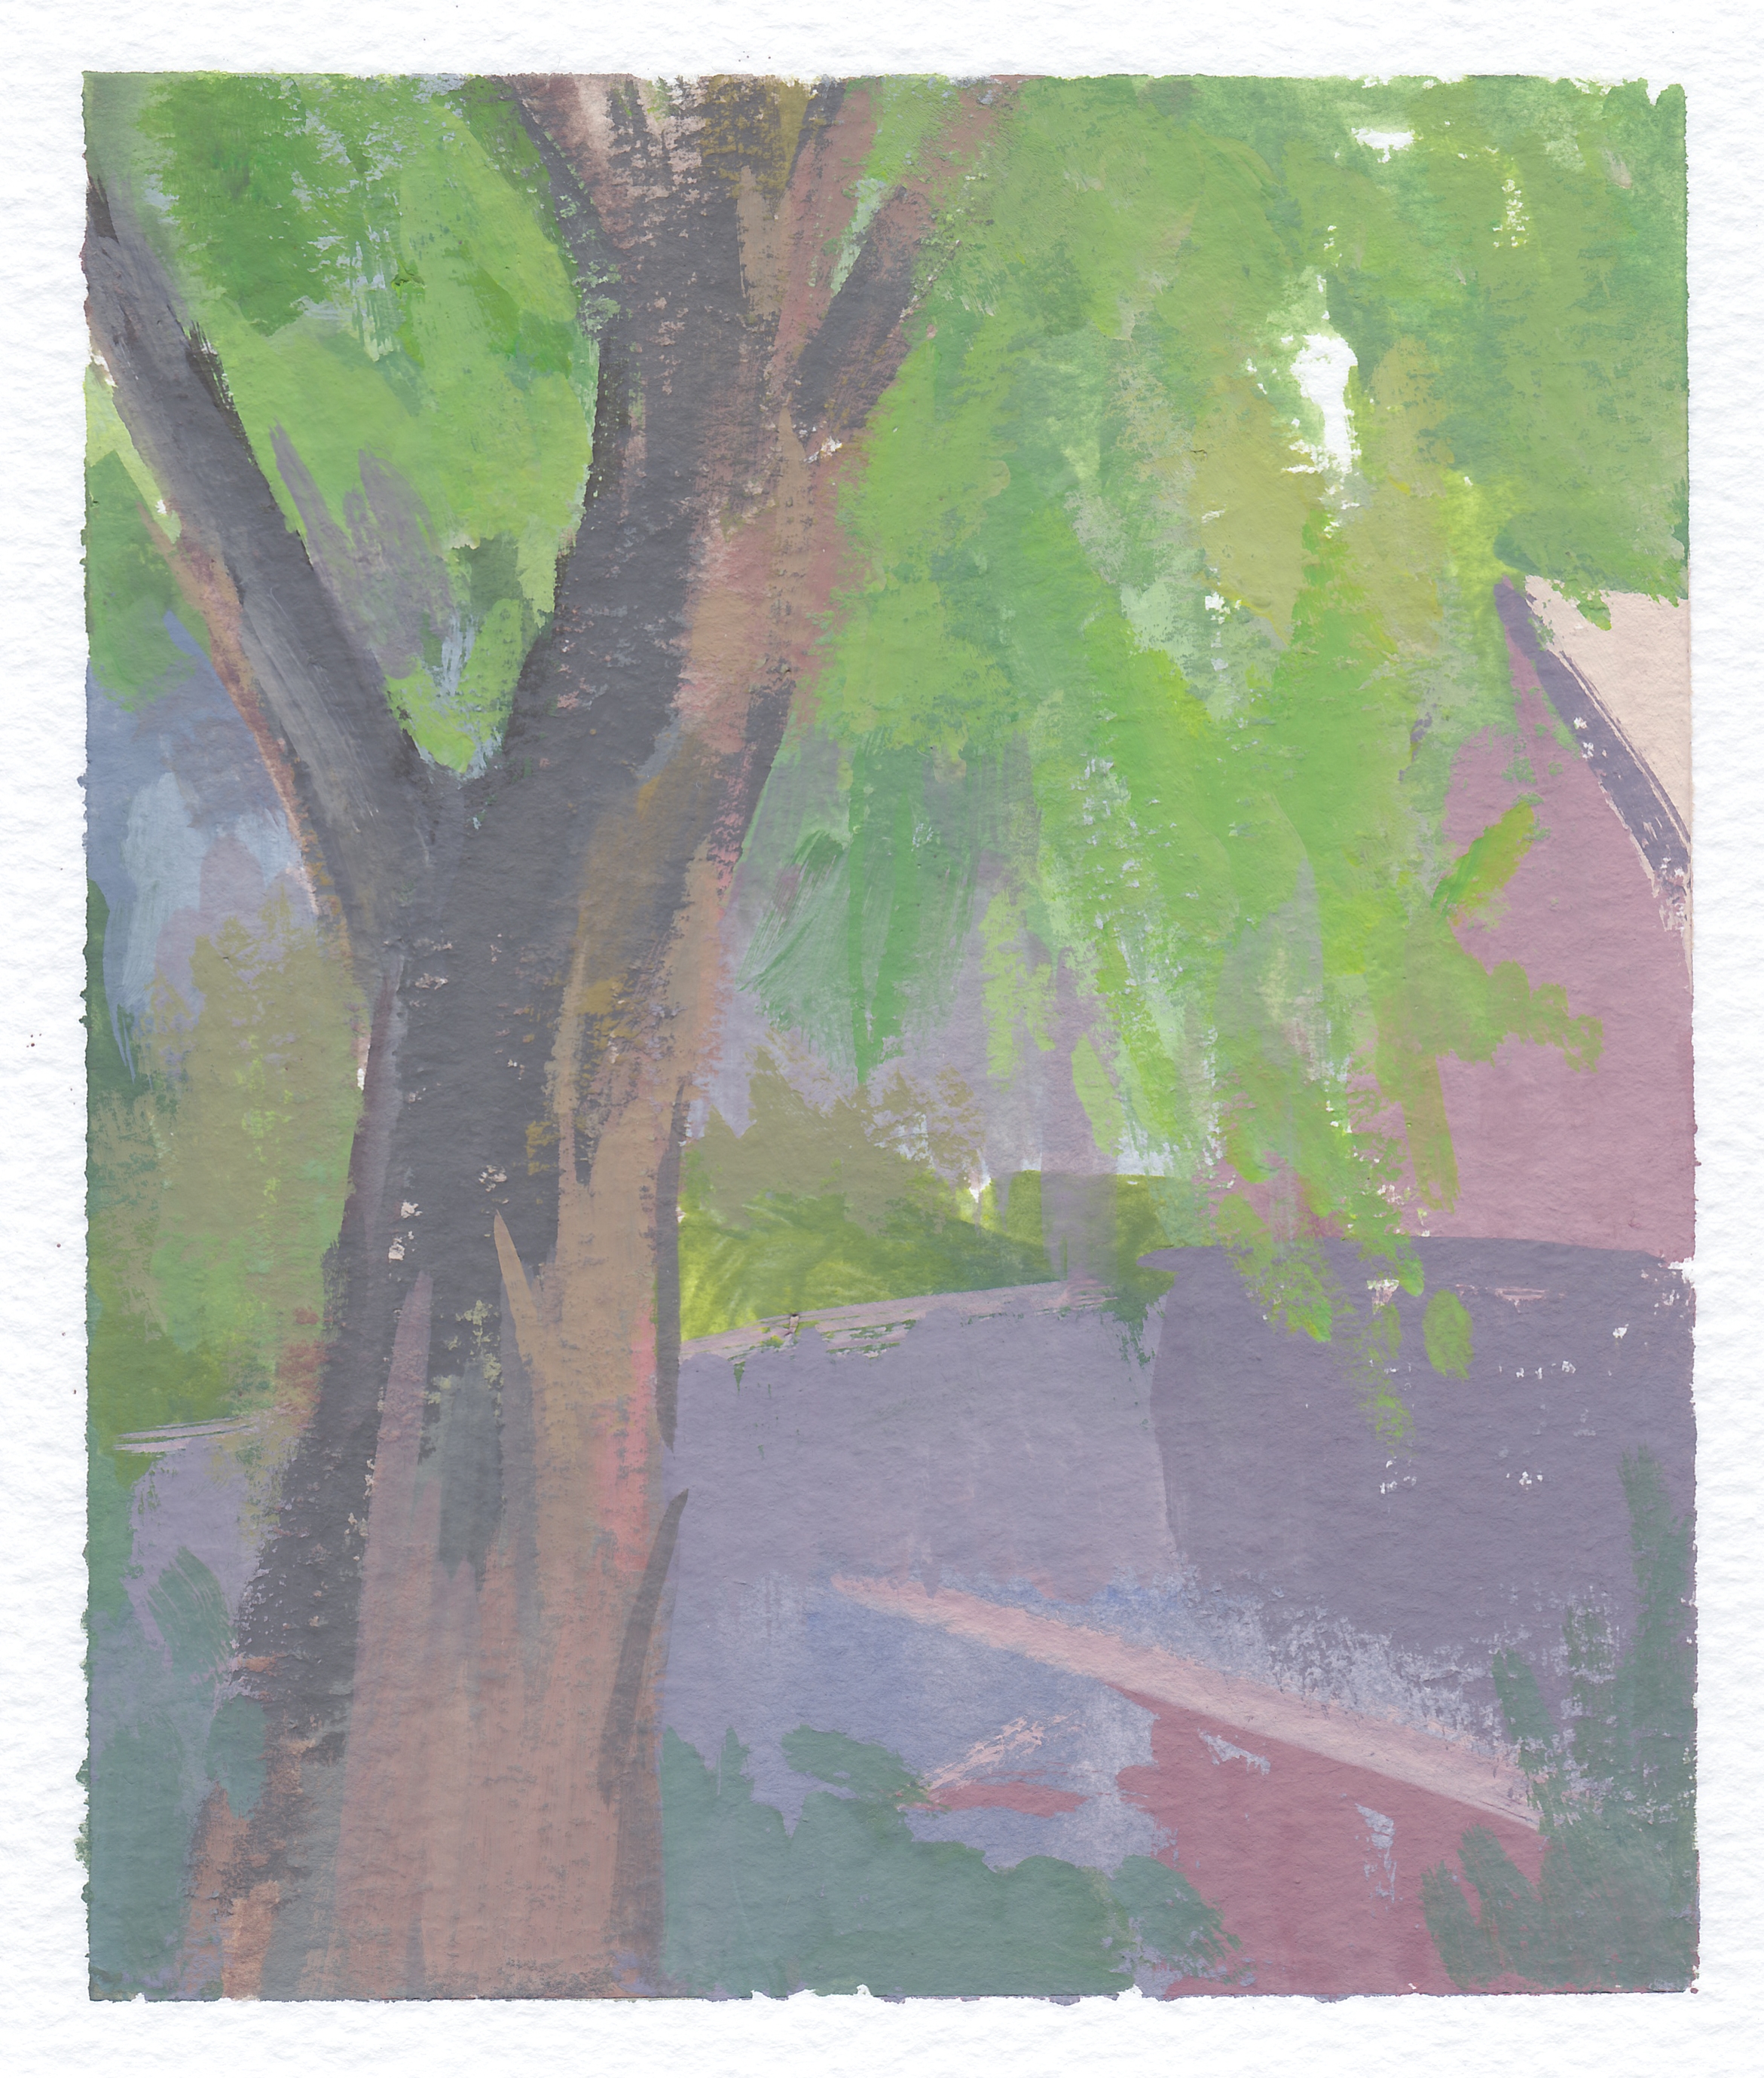    oak     gouache on paper 4x5" 2016  available by request 